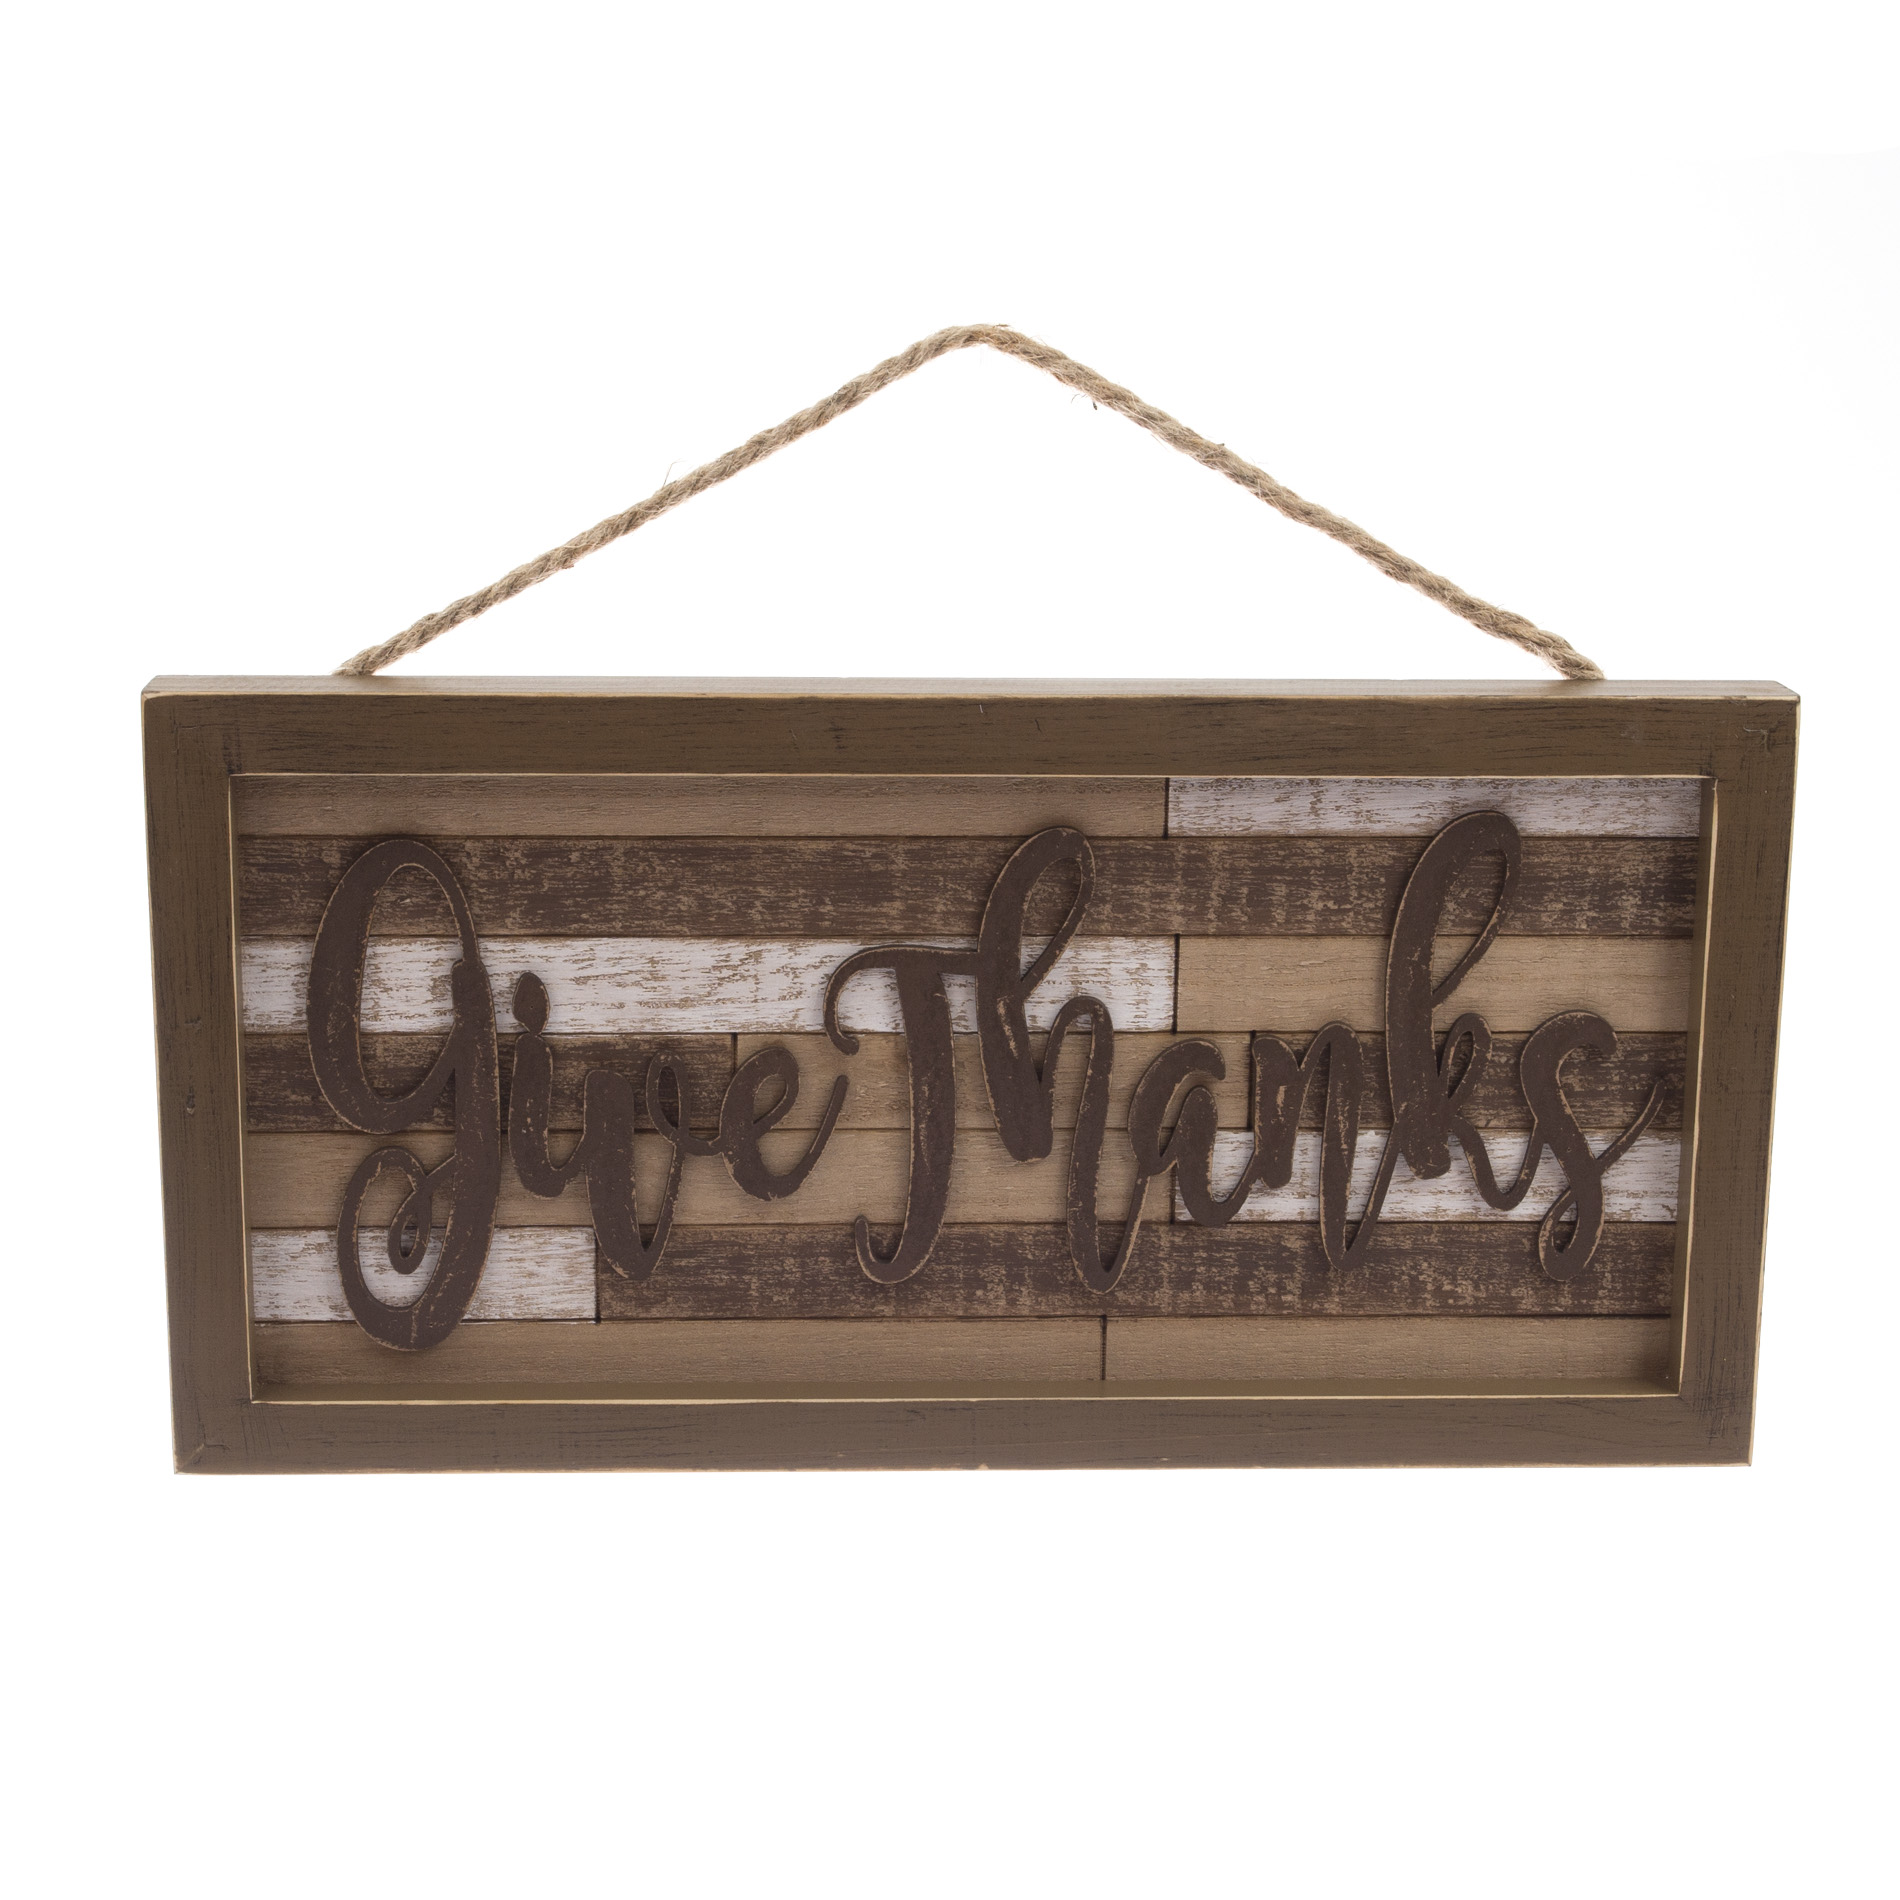 Be Thankful 16" Shiplap Wall Hanging with Rope Loop